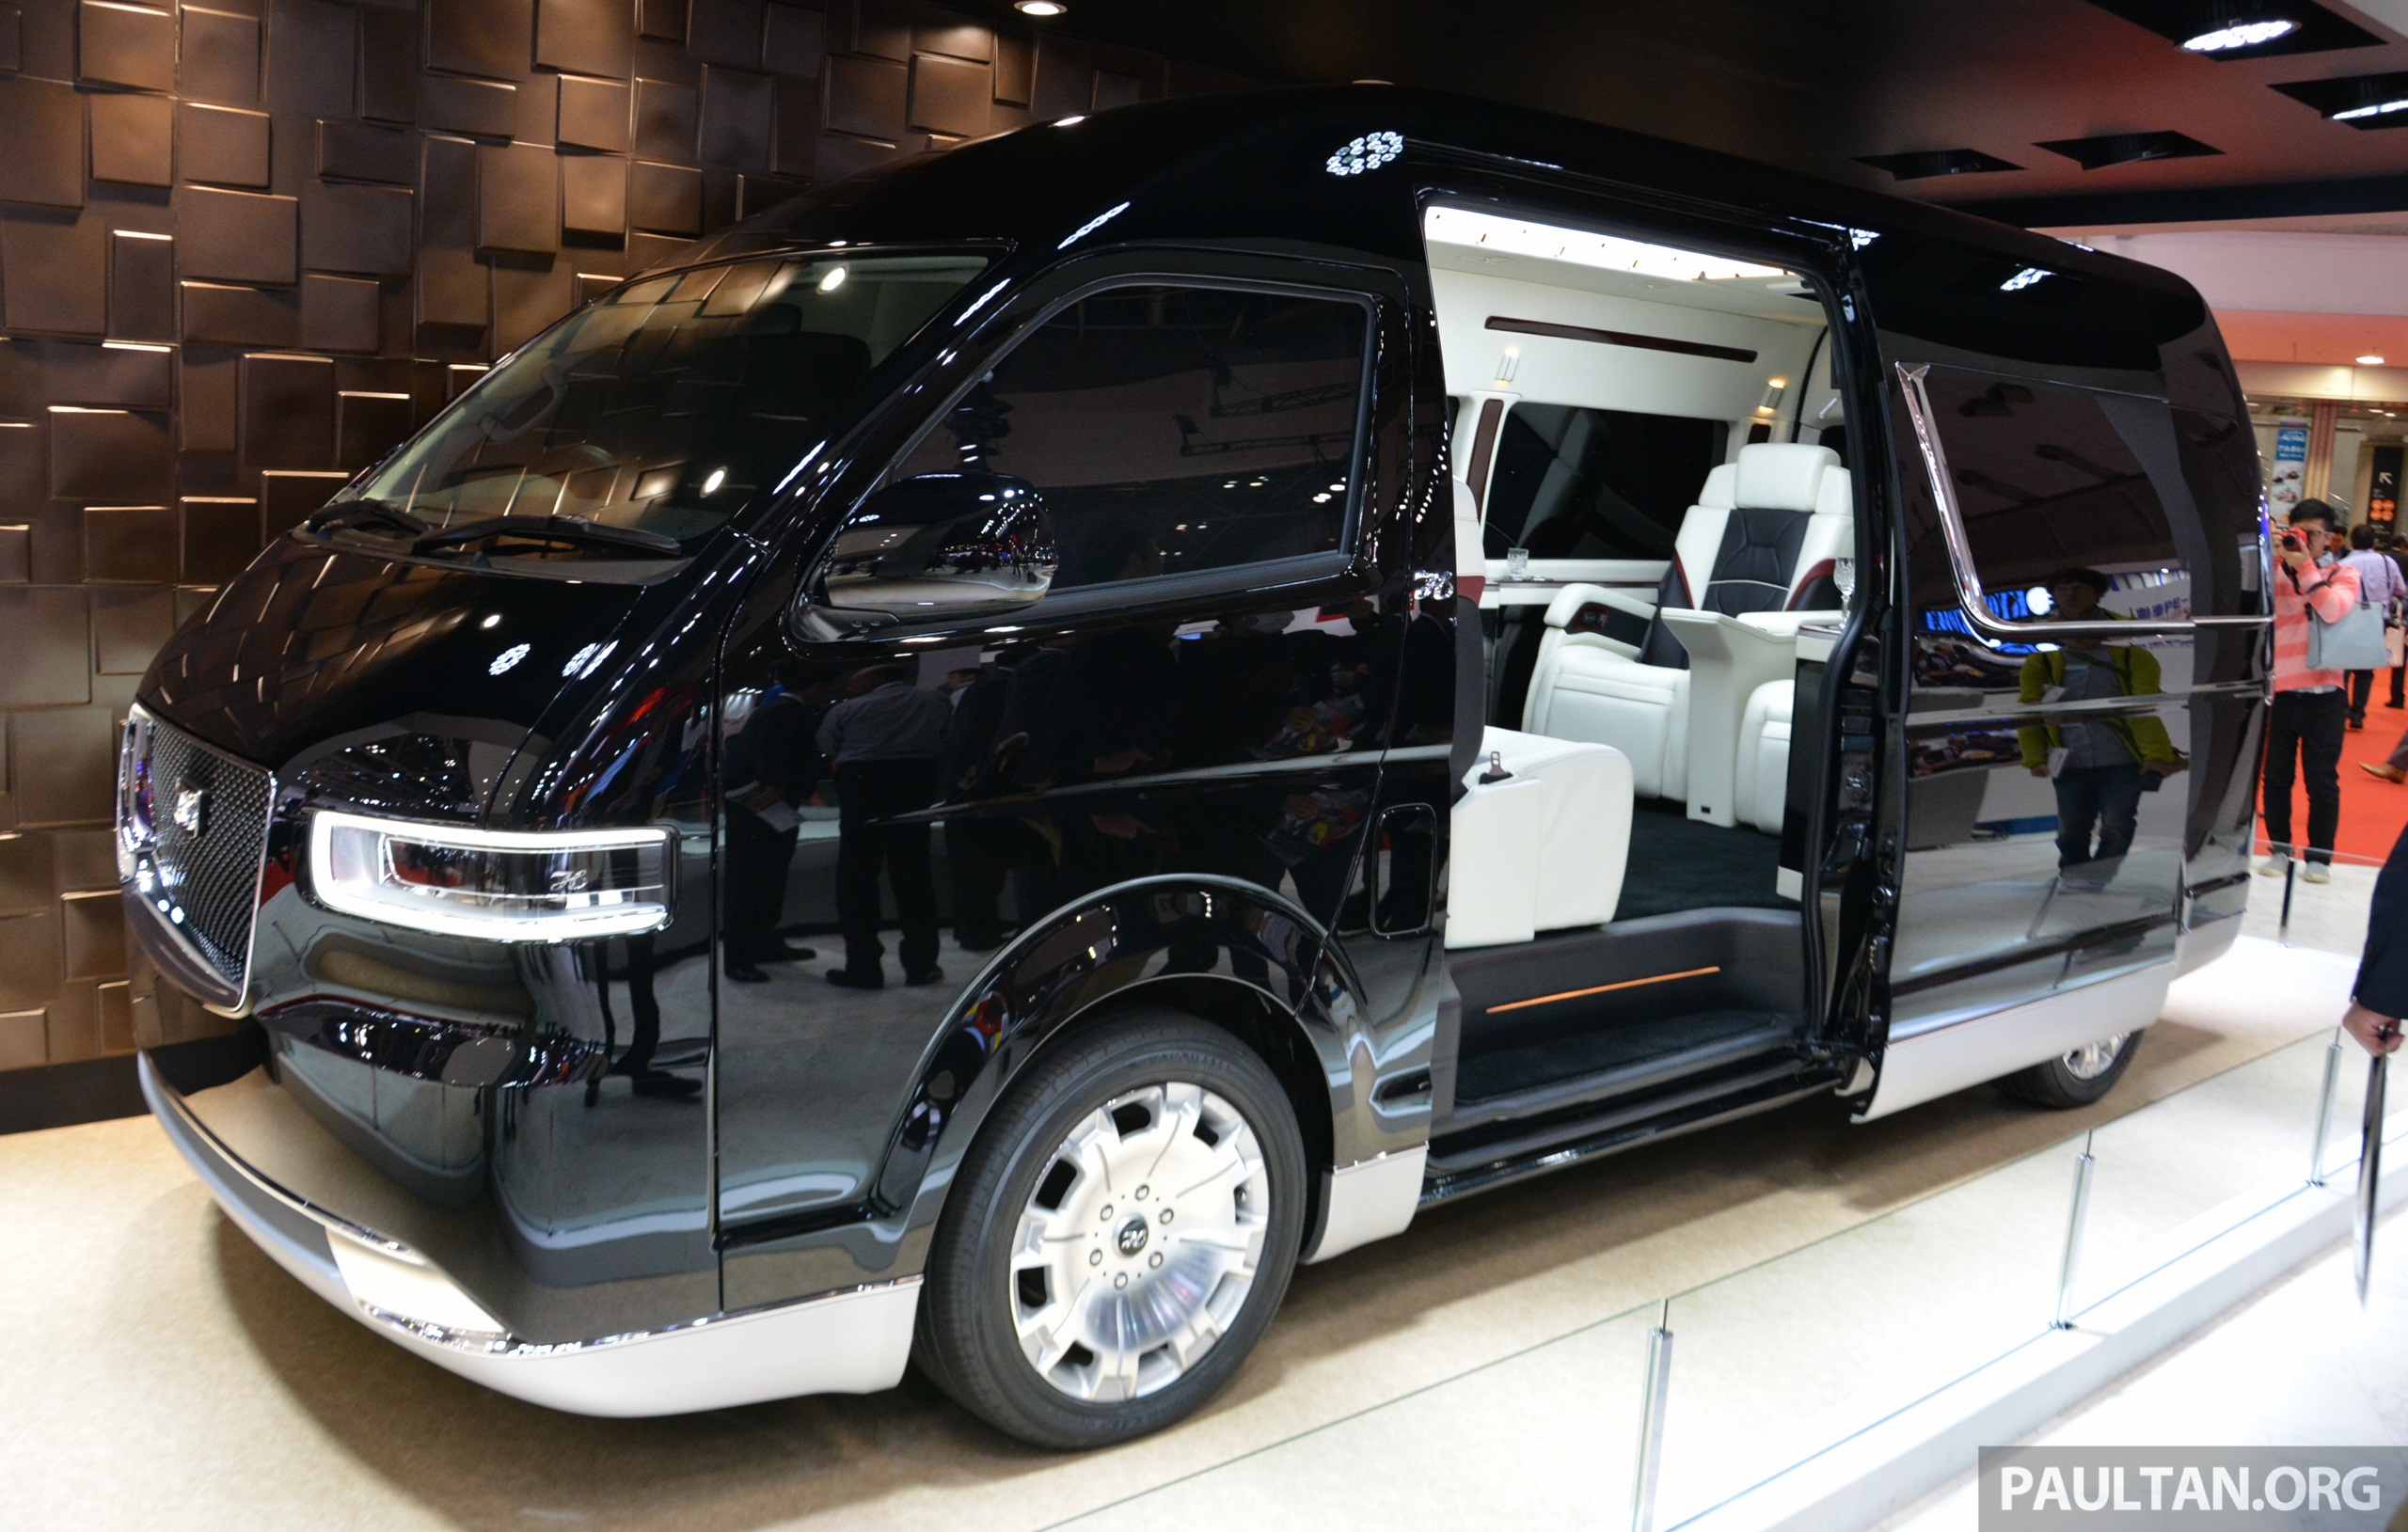 Toyota HiAce Platinum Lounge, A Luxury Car With The Feel of Cafe